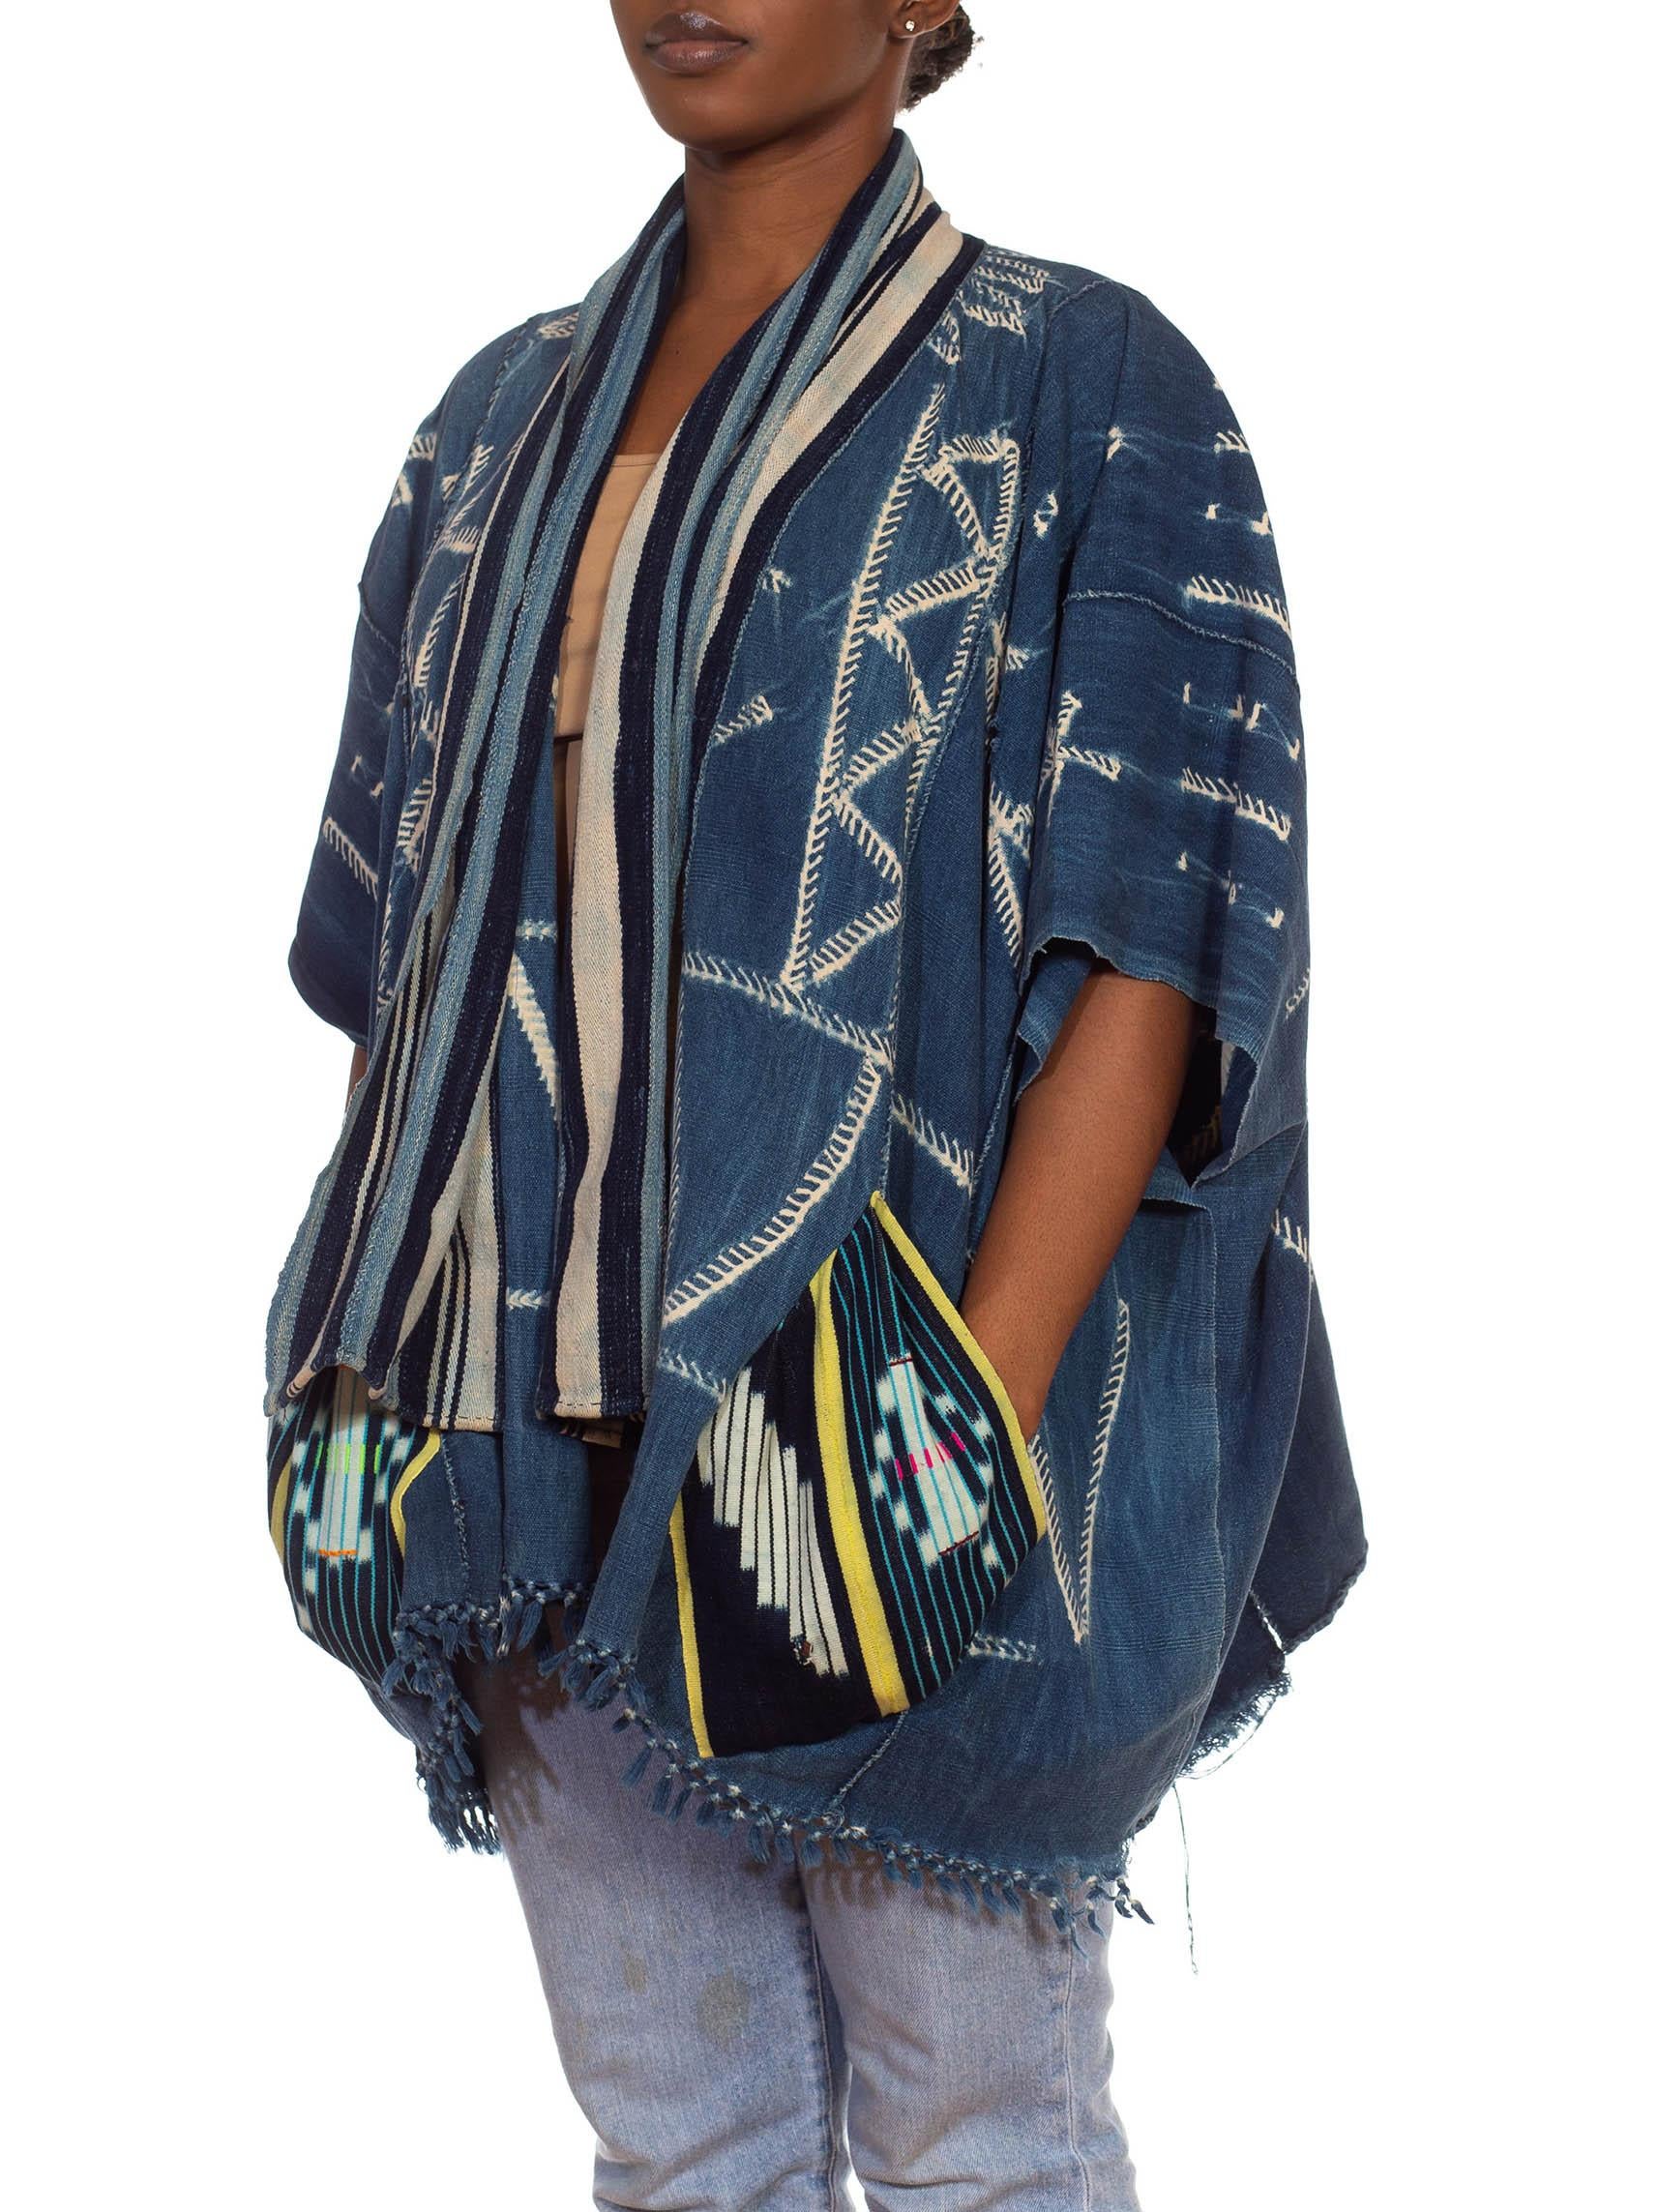 Morphew Collection Blue & Ivory Cotton Denim Hand Woven African Indigo Poncho
MORPHEW COLLECTION is made entirely by hand in our NYC Ateliér of rare antique materials sourced from around the globe. Our sustainable vintage materials represent over a